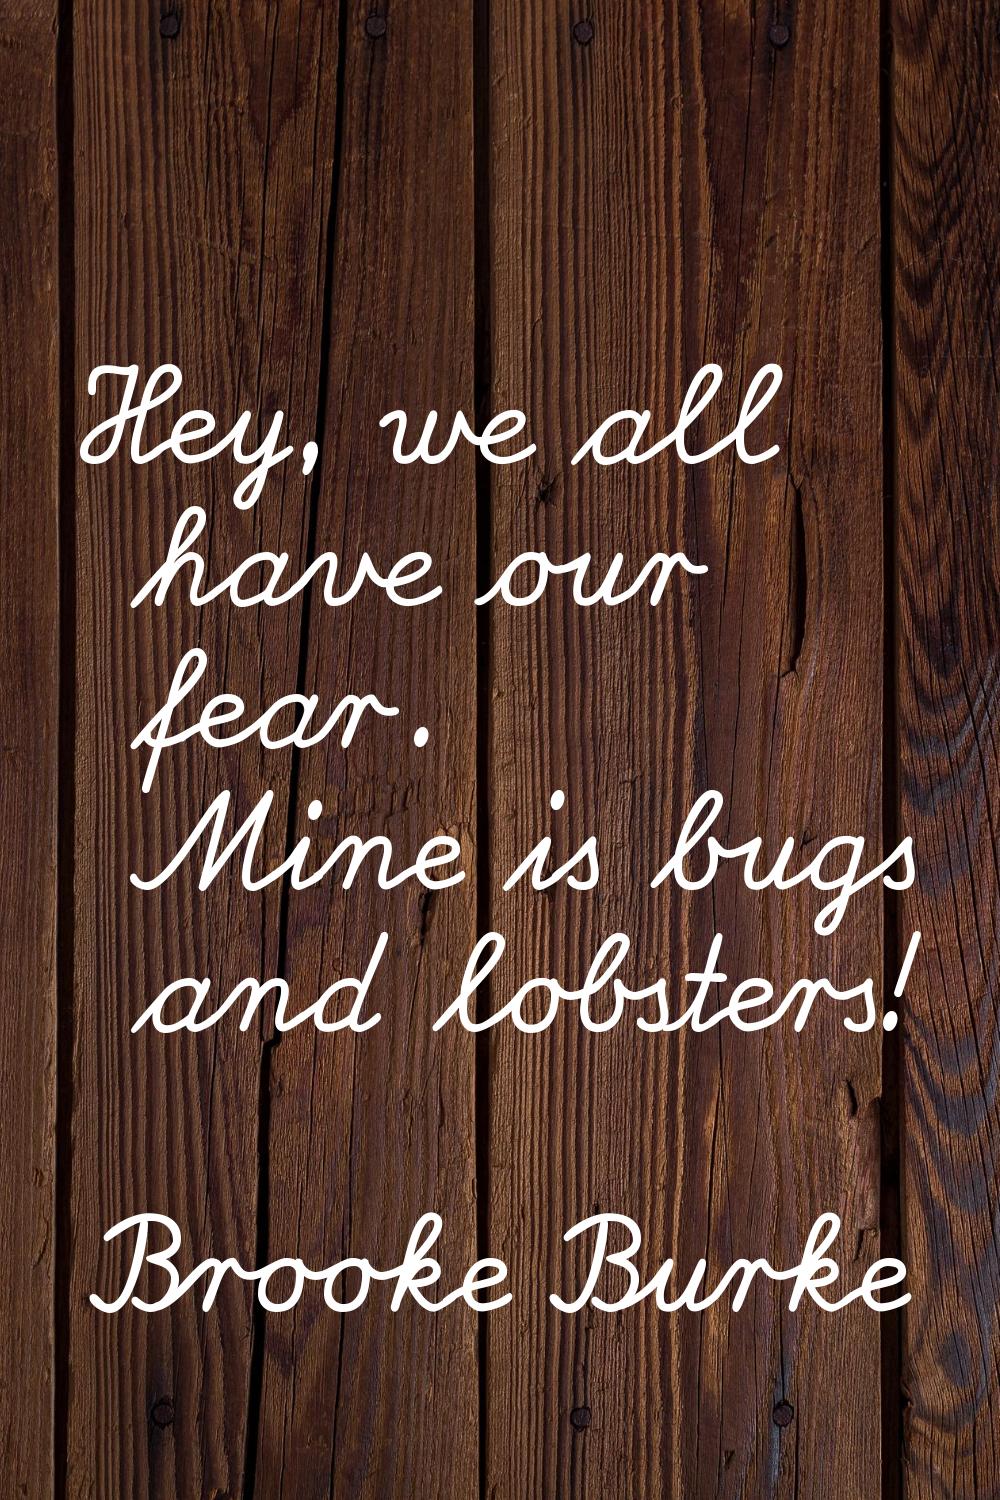 Hey, we all have our fear. Mine is bugs and lobsters!